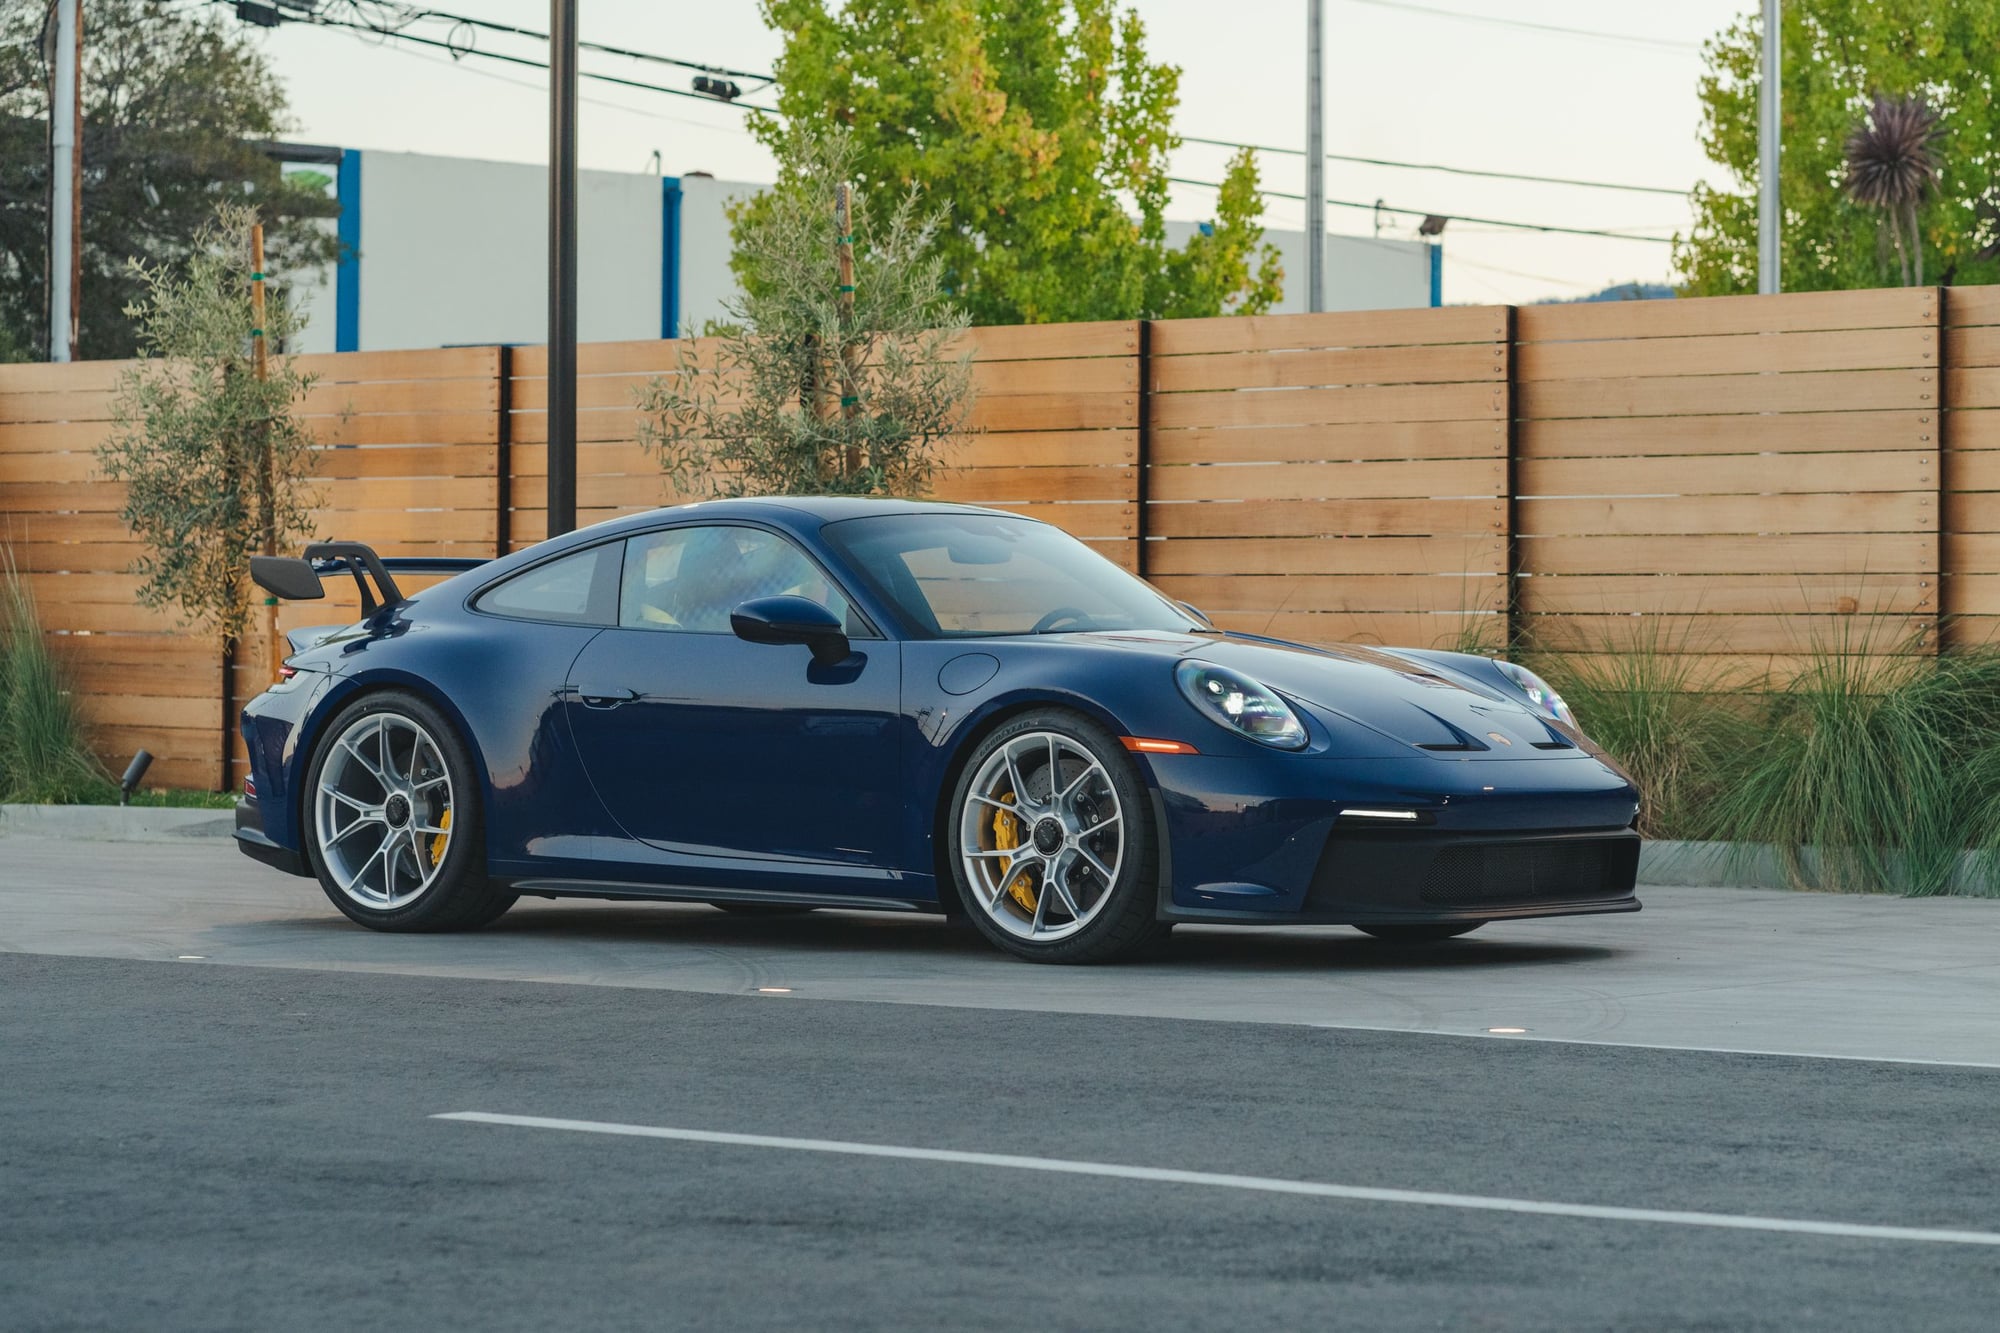 2022 Porsche 911 - 2022 992 GT3 in PTS Albert Blue With 6-Speed Manual and $46,800 in Options. - Used - VIN WP0AC2A94NS270753 - 46 Miles - 6 cyl - 2WD - Manual - Coupe - Blue - Redwood City, CA 94063, United States